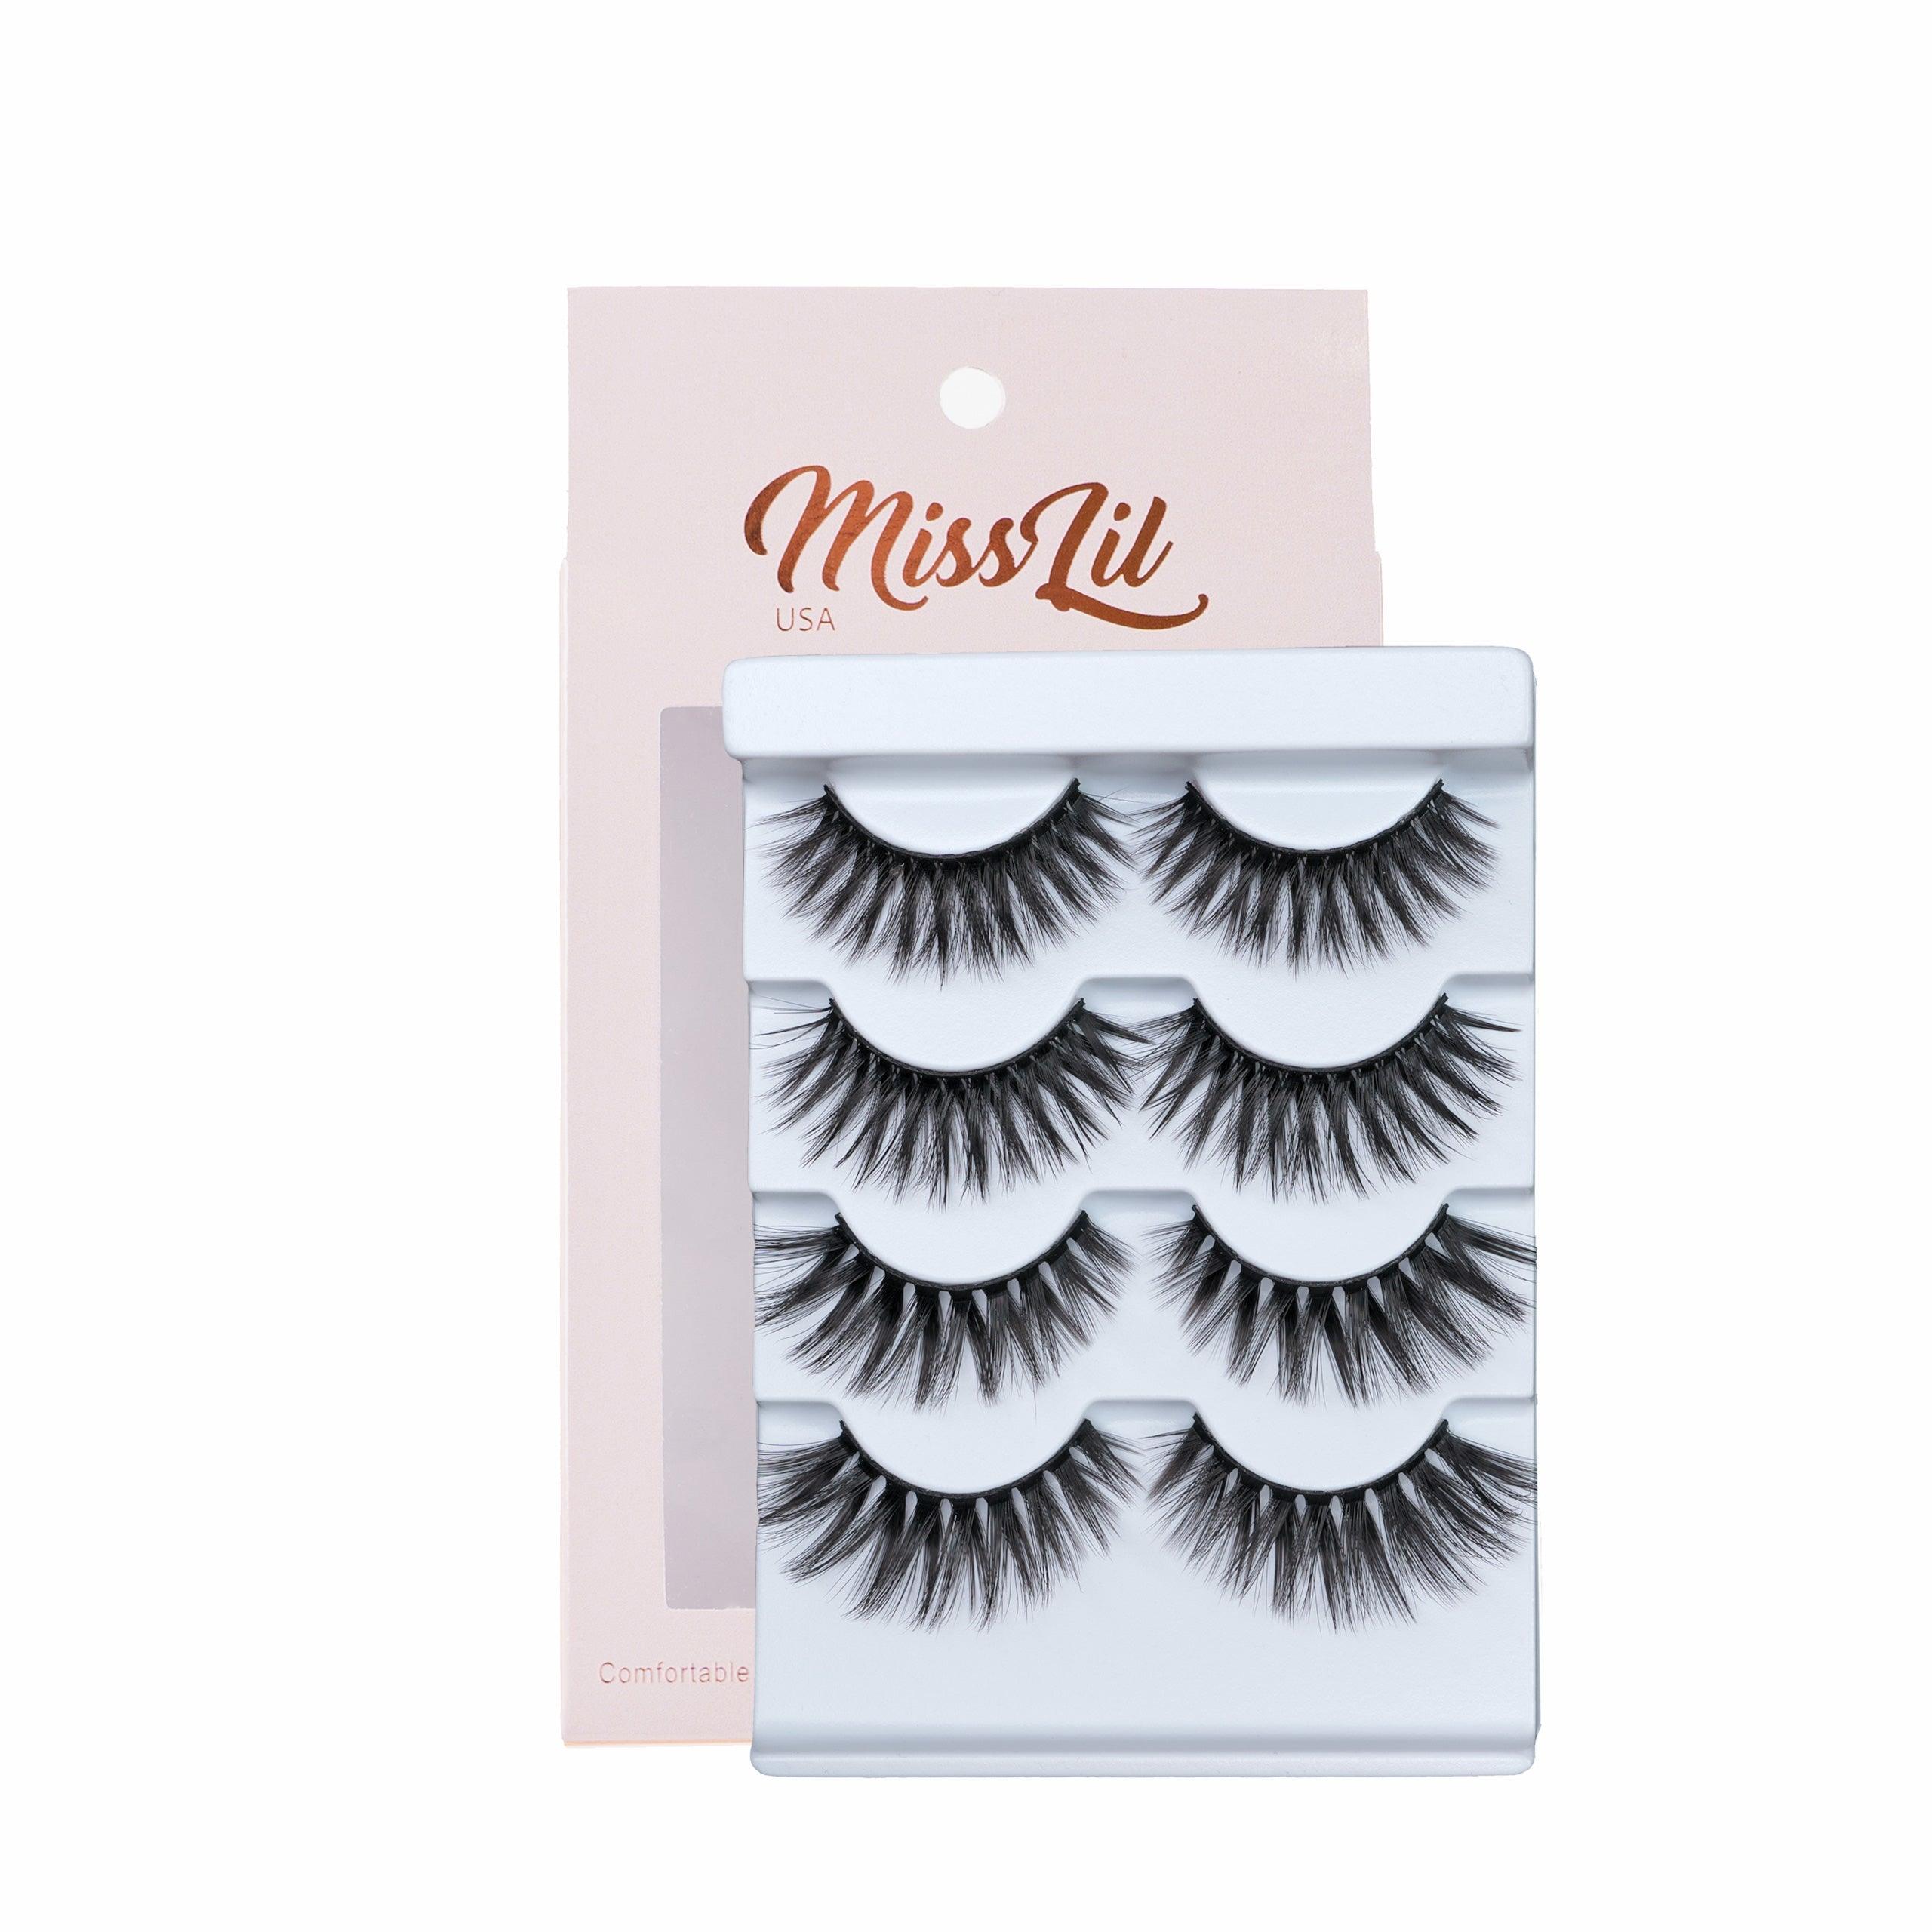 4 Pairs Lashes - Classic Collection #8 - Miss Lil USA